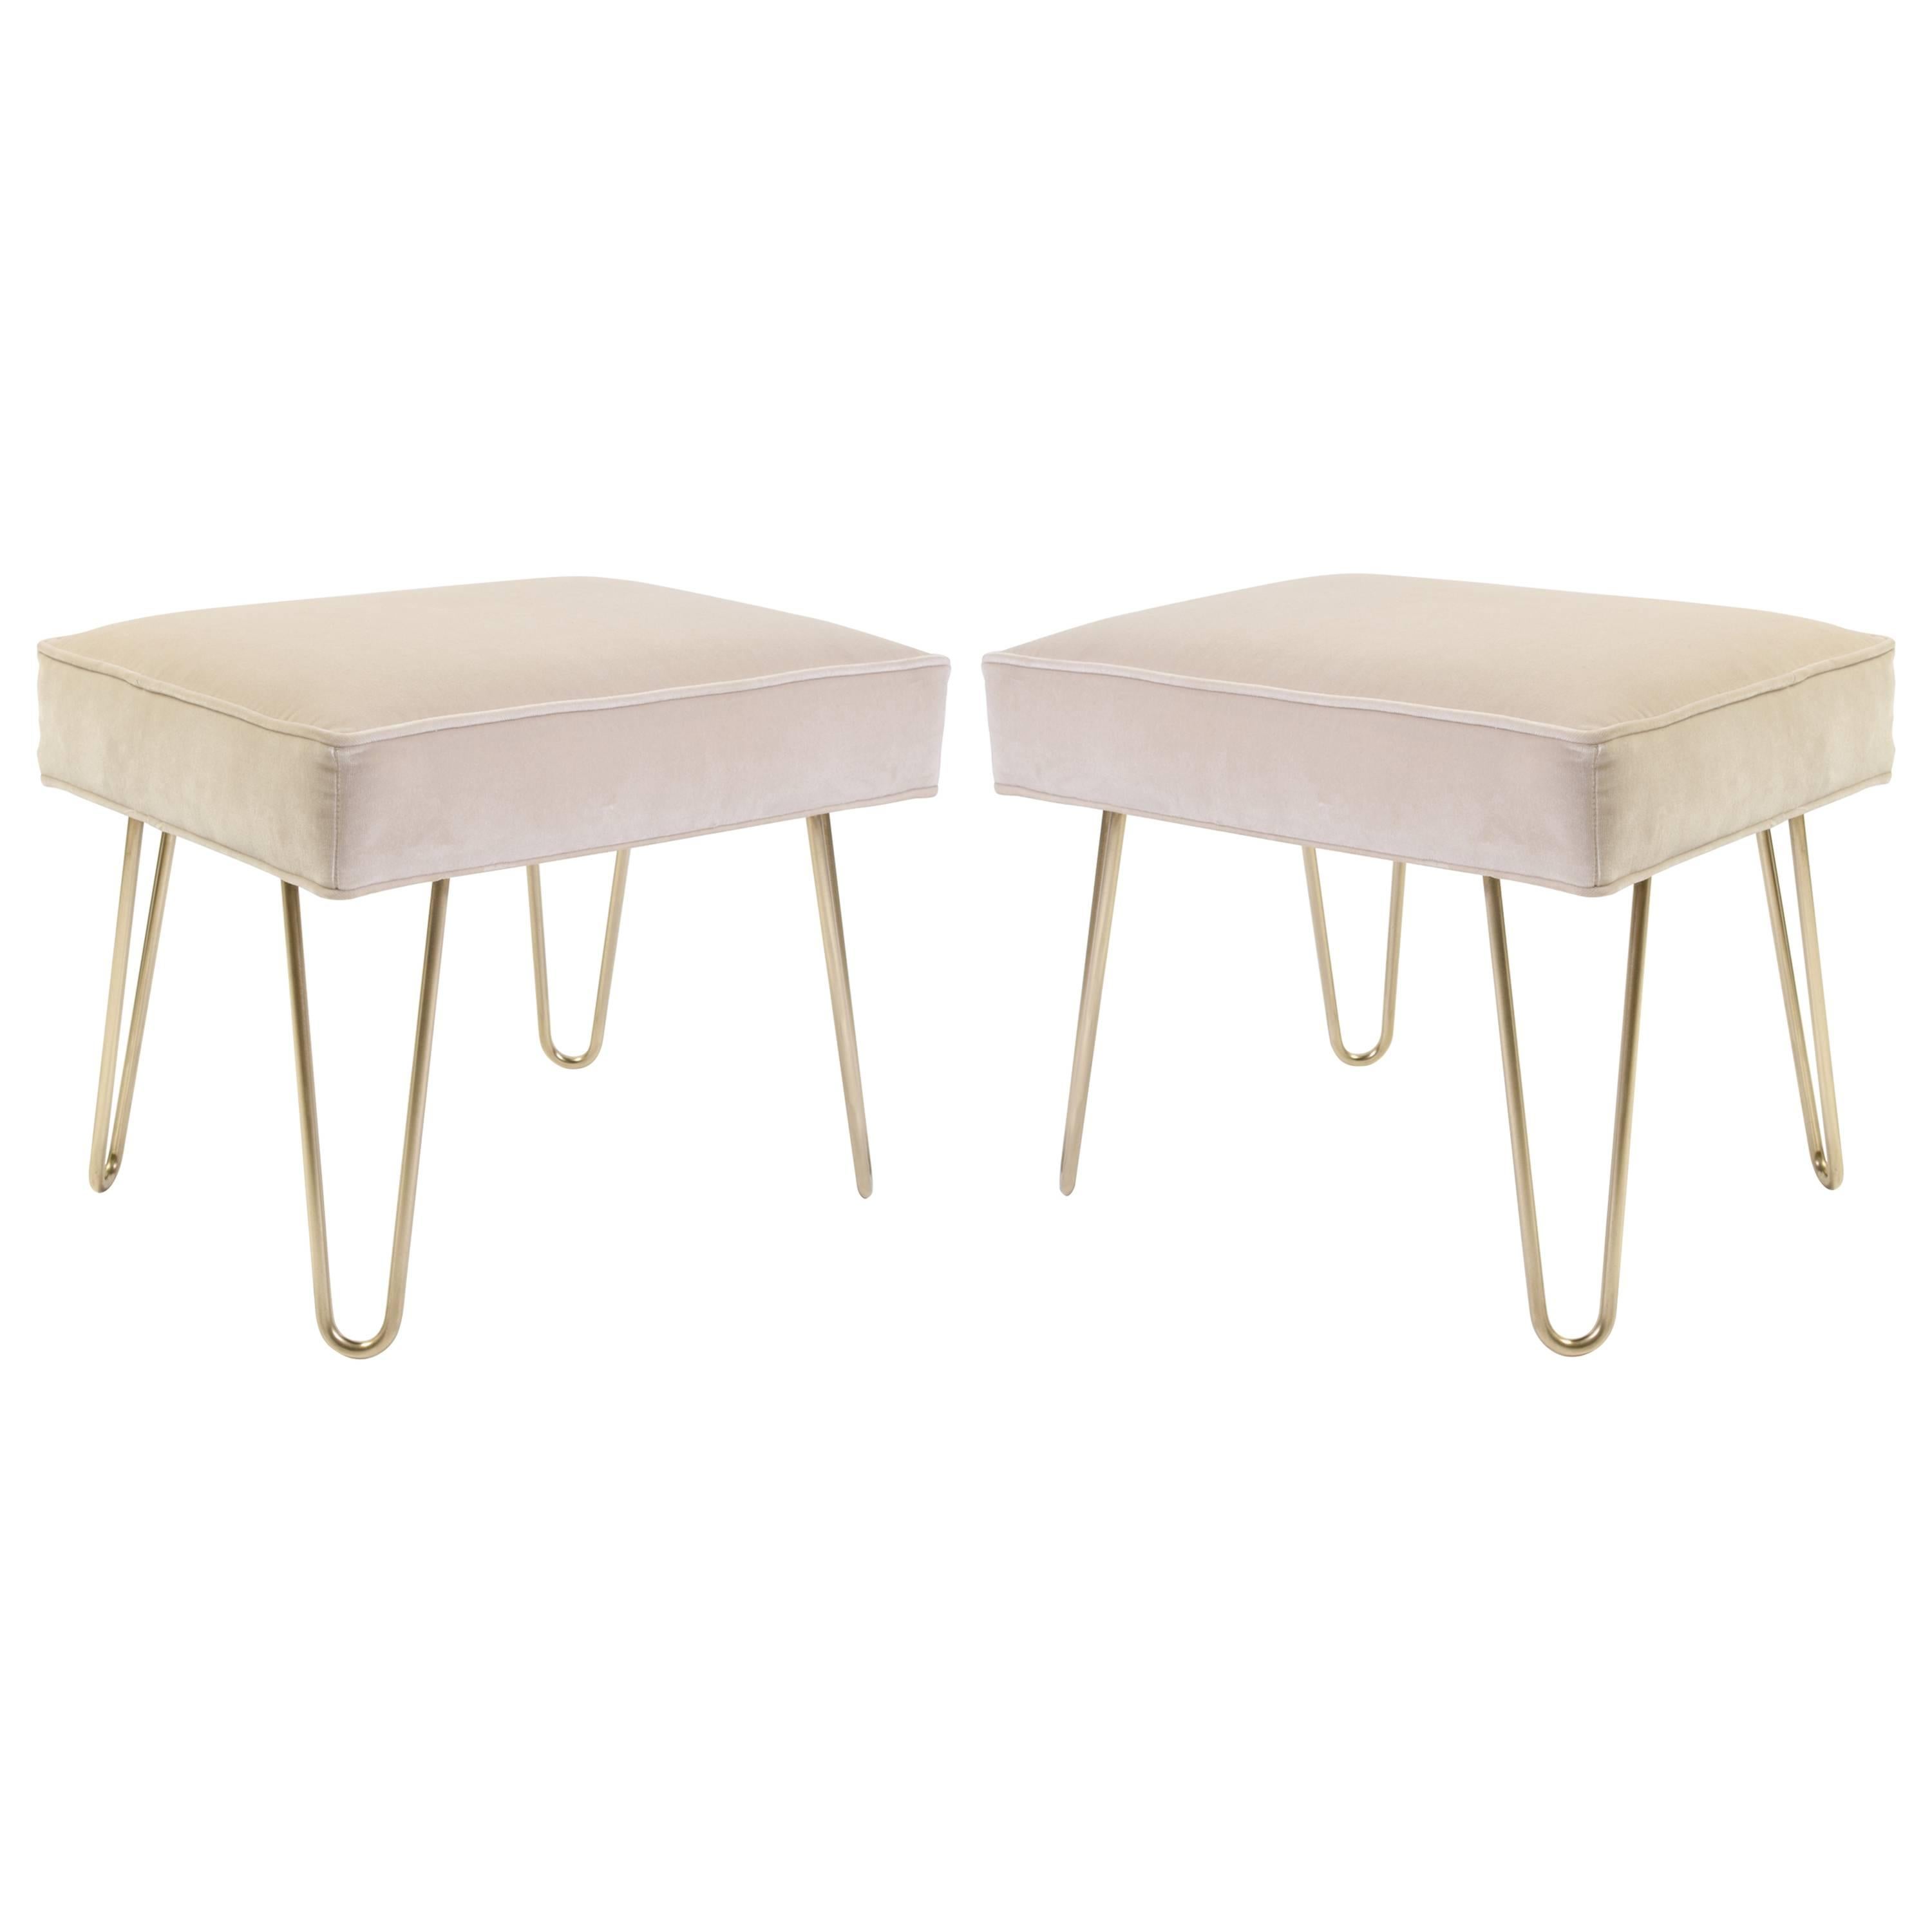 Petite Brass Hairpin Ottomans in Oyster Velvet by Montage